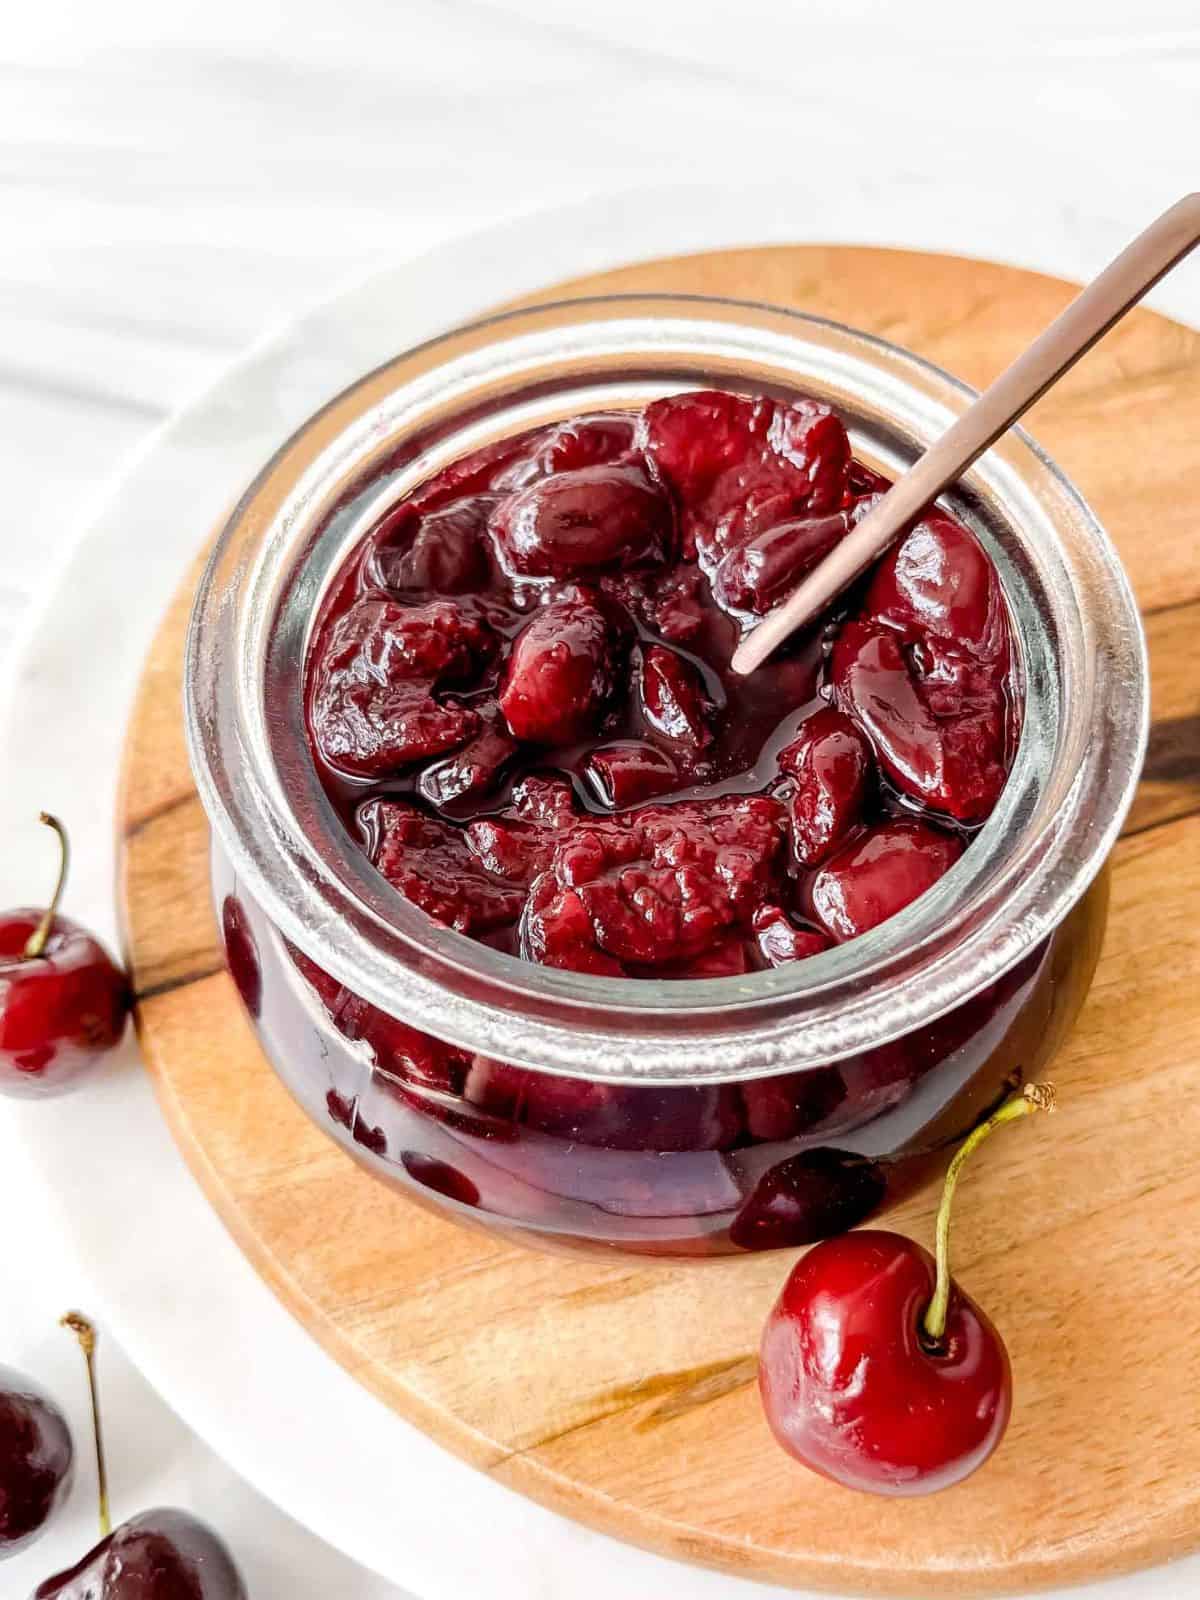 cherry compote in a glass jar with a spoon in it on a wooden board next to cherries.